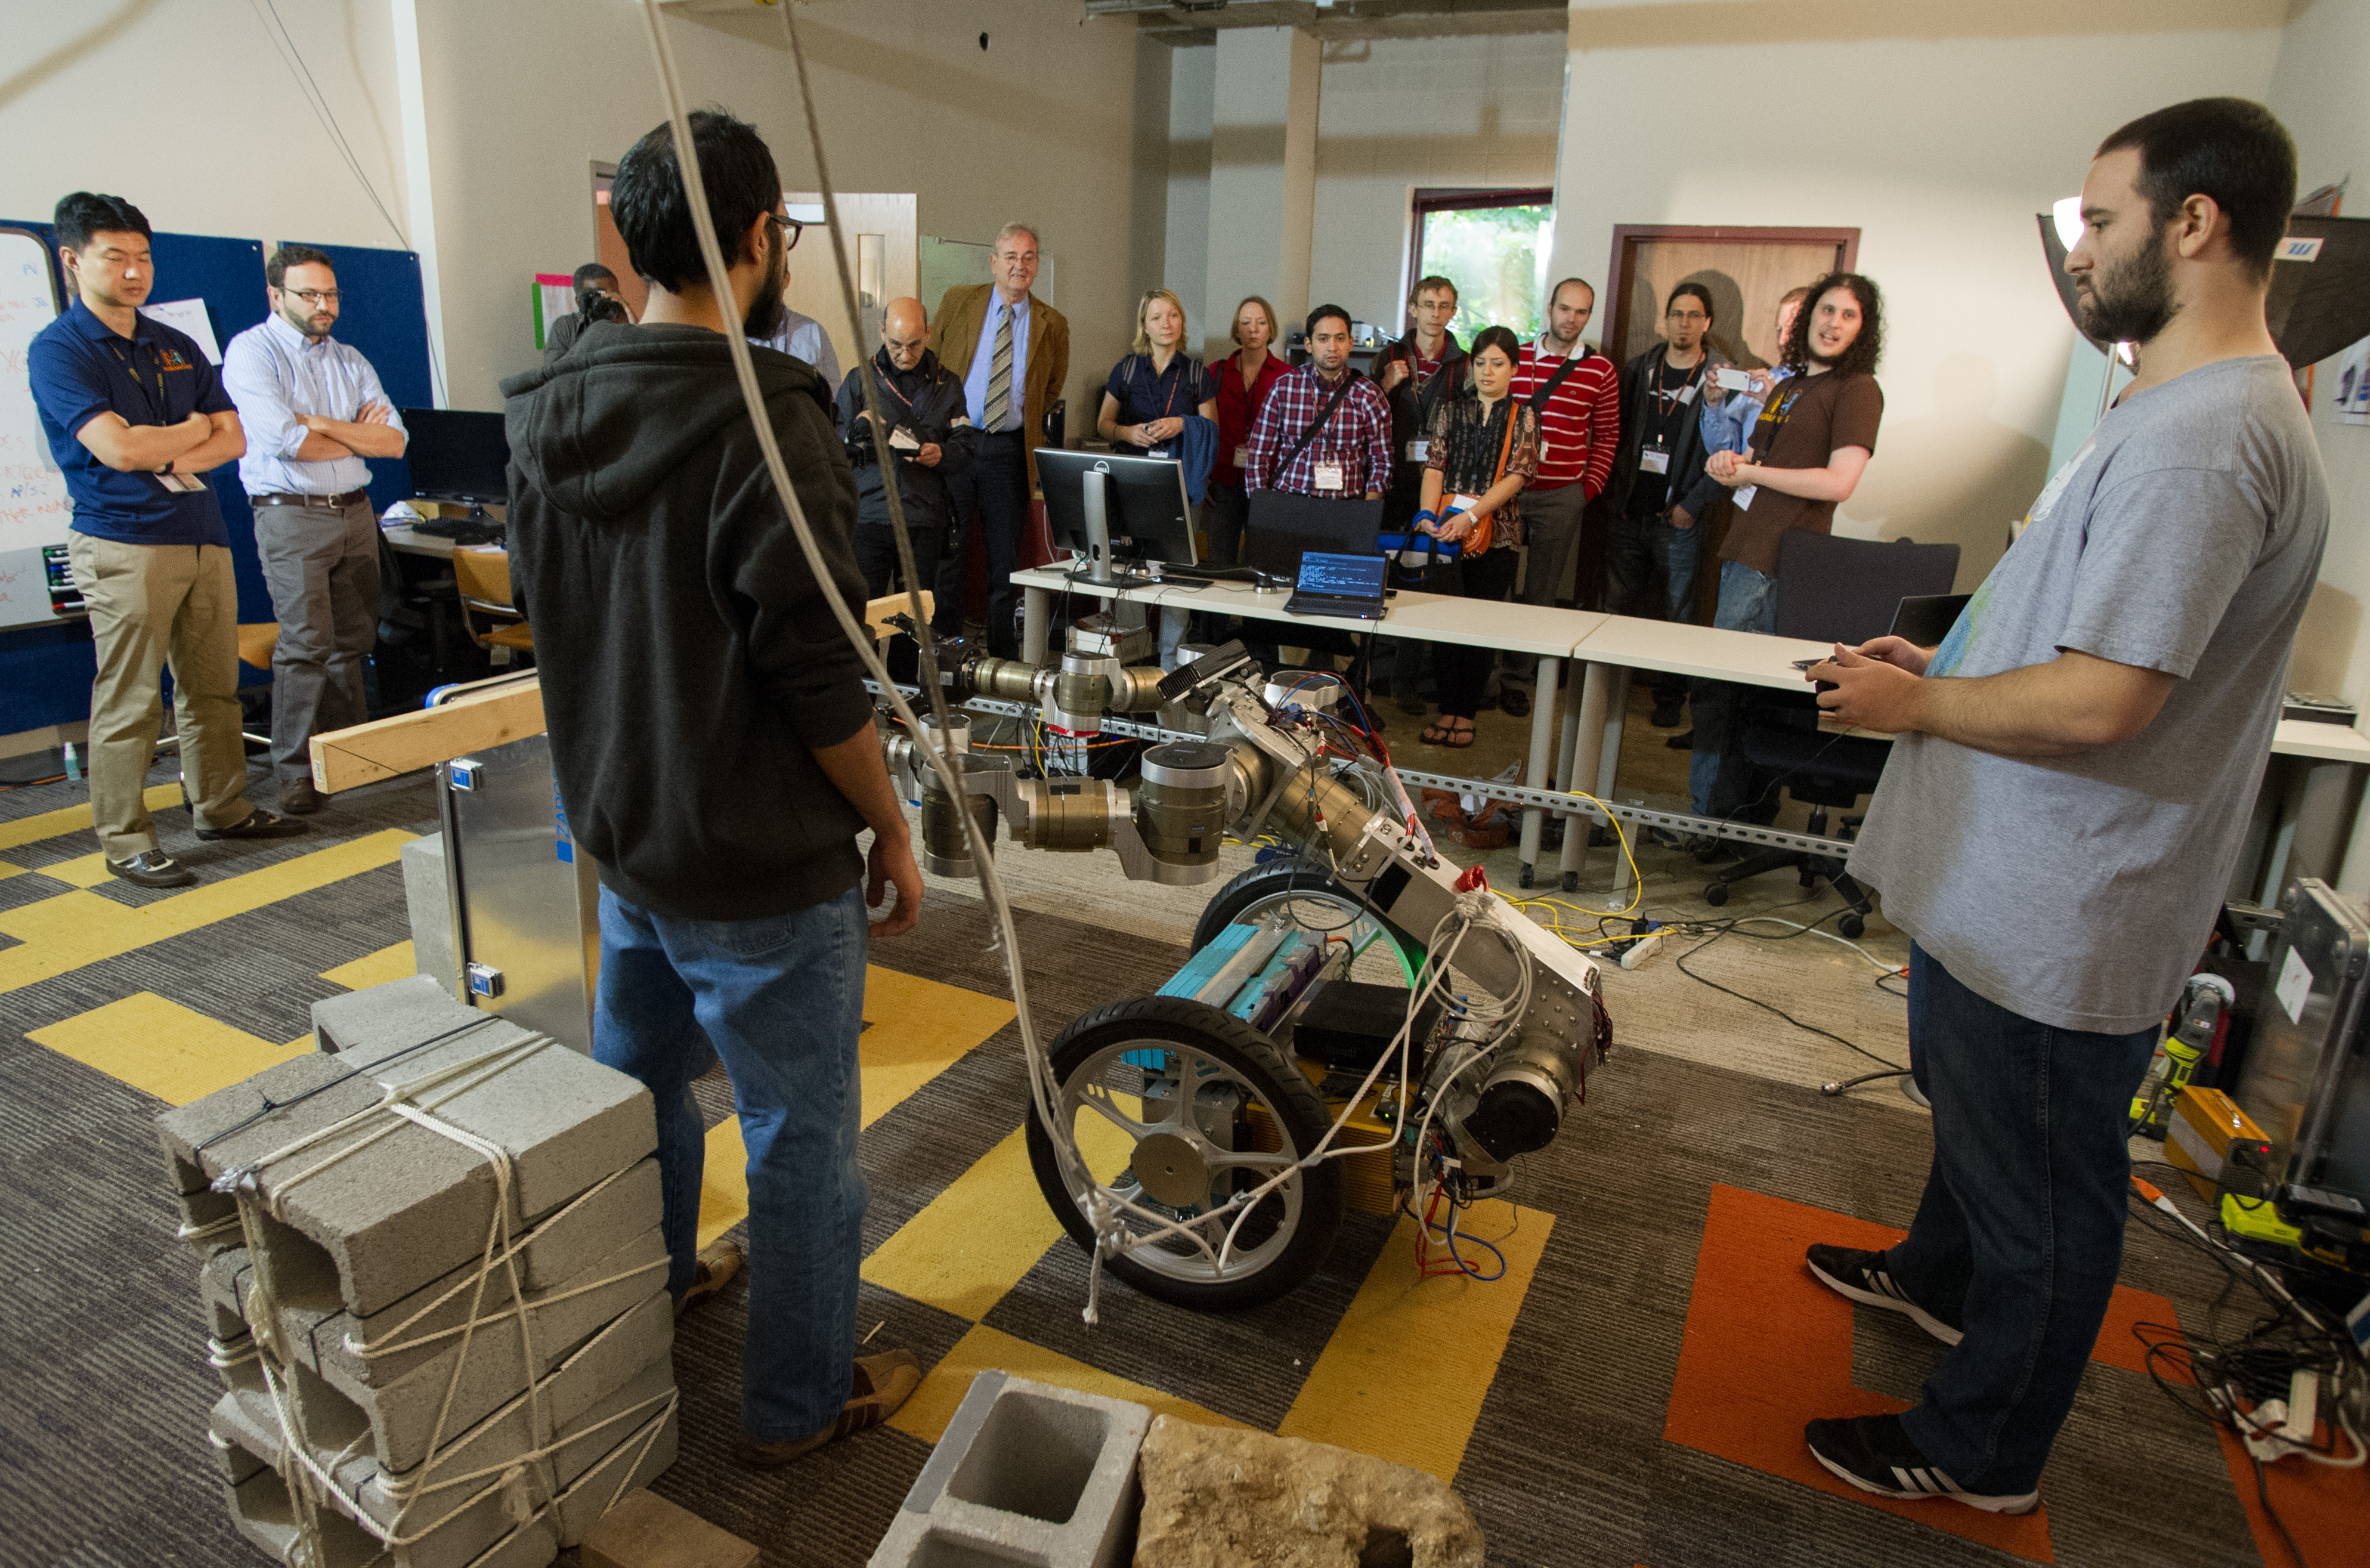 Roboticists from around the world visit Georgia Tech's Humanoid Robotics Lab the Humanoids 2013 conference.